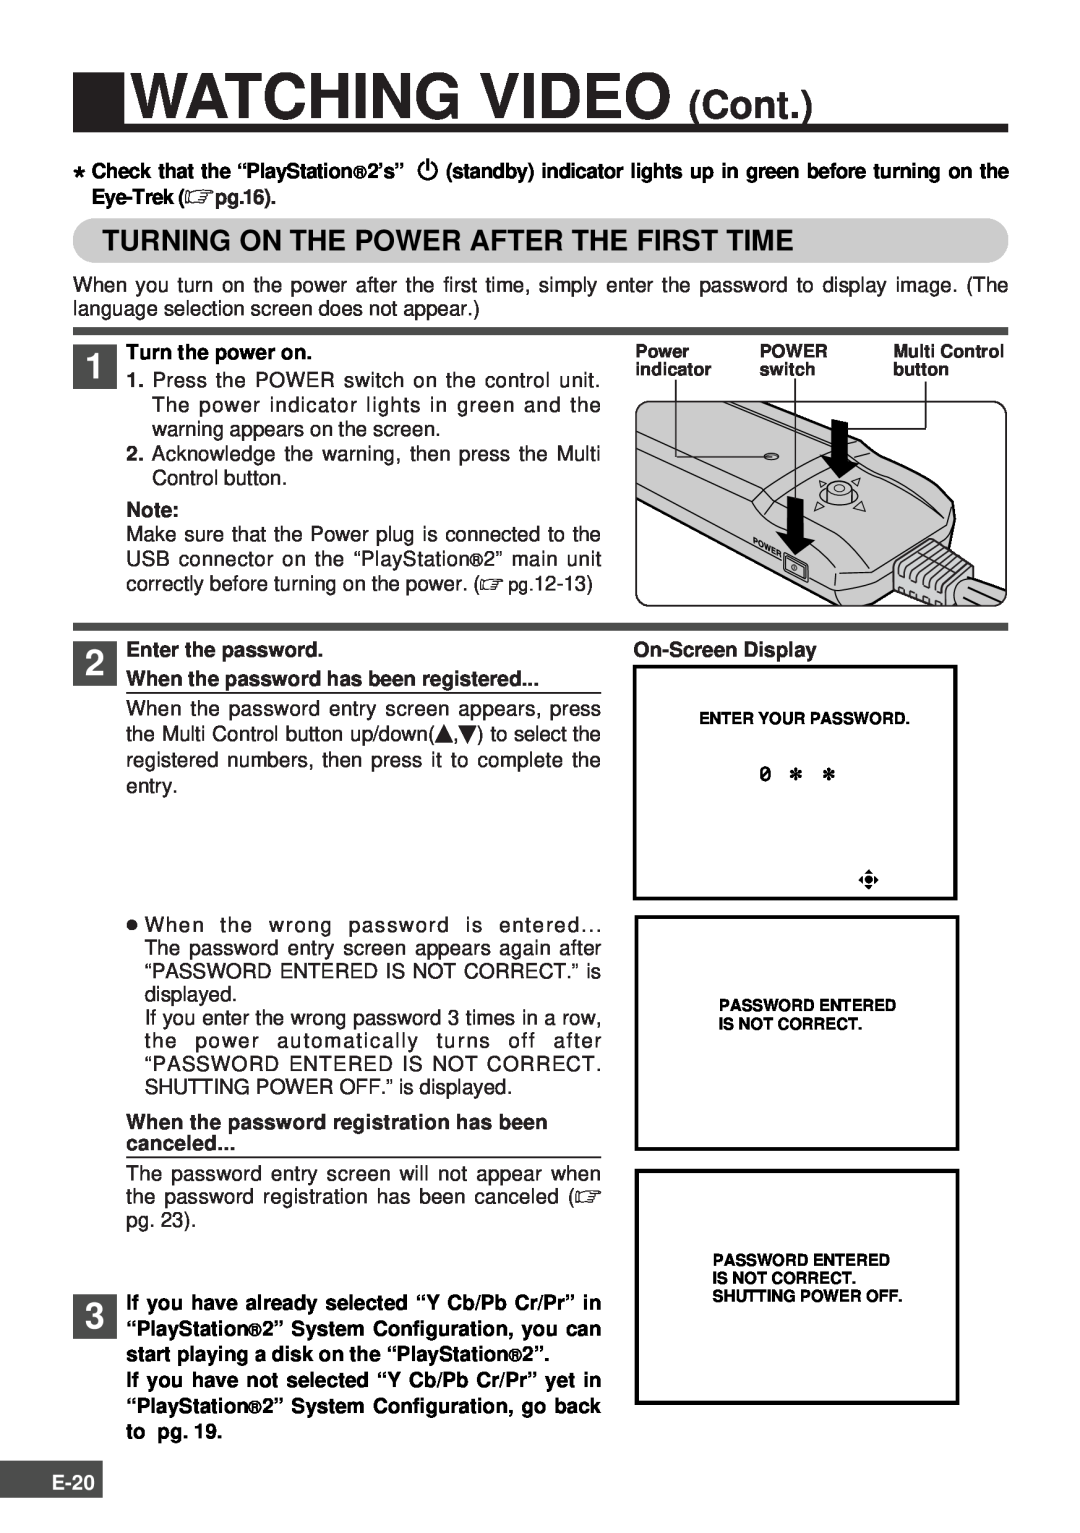 Olympus SCPH-10130U instruction manual WATCHING VIDEO Cont, Turning On The Power After The First Time, E-20 